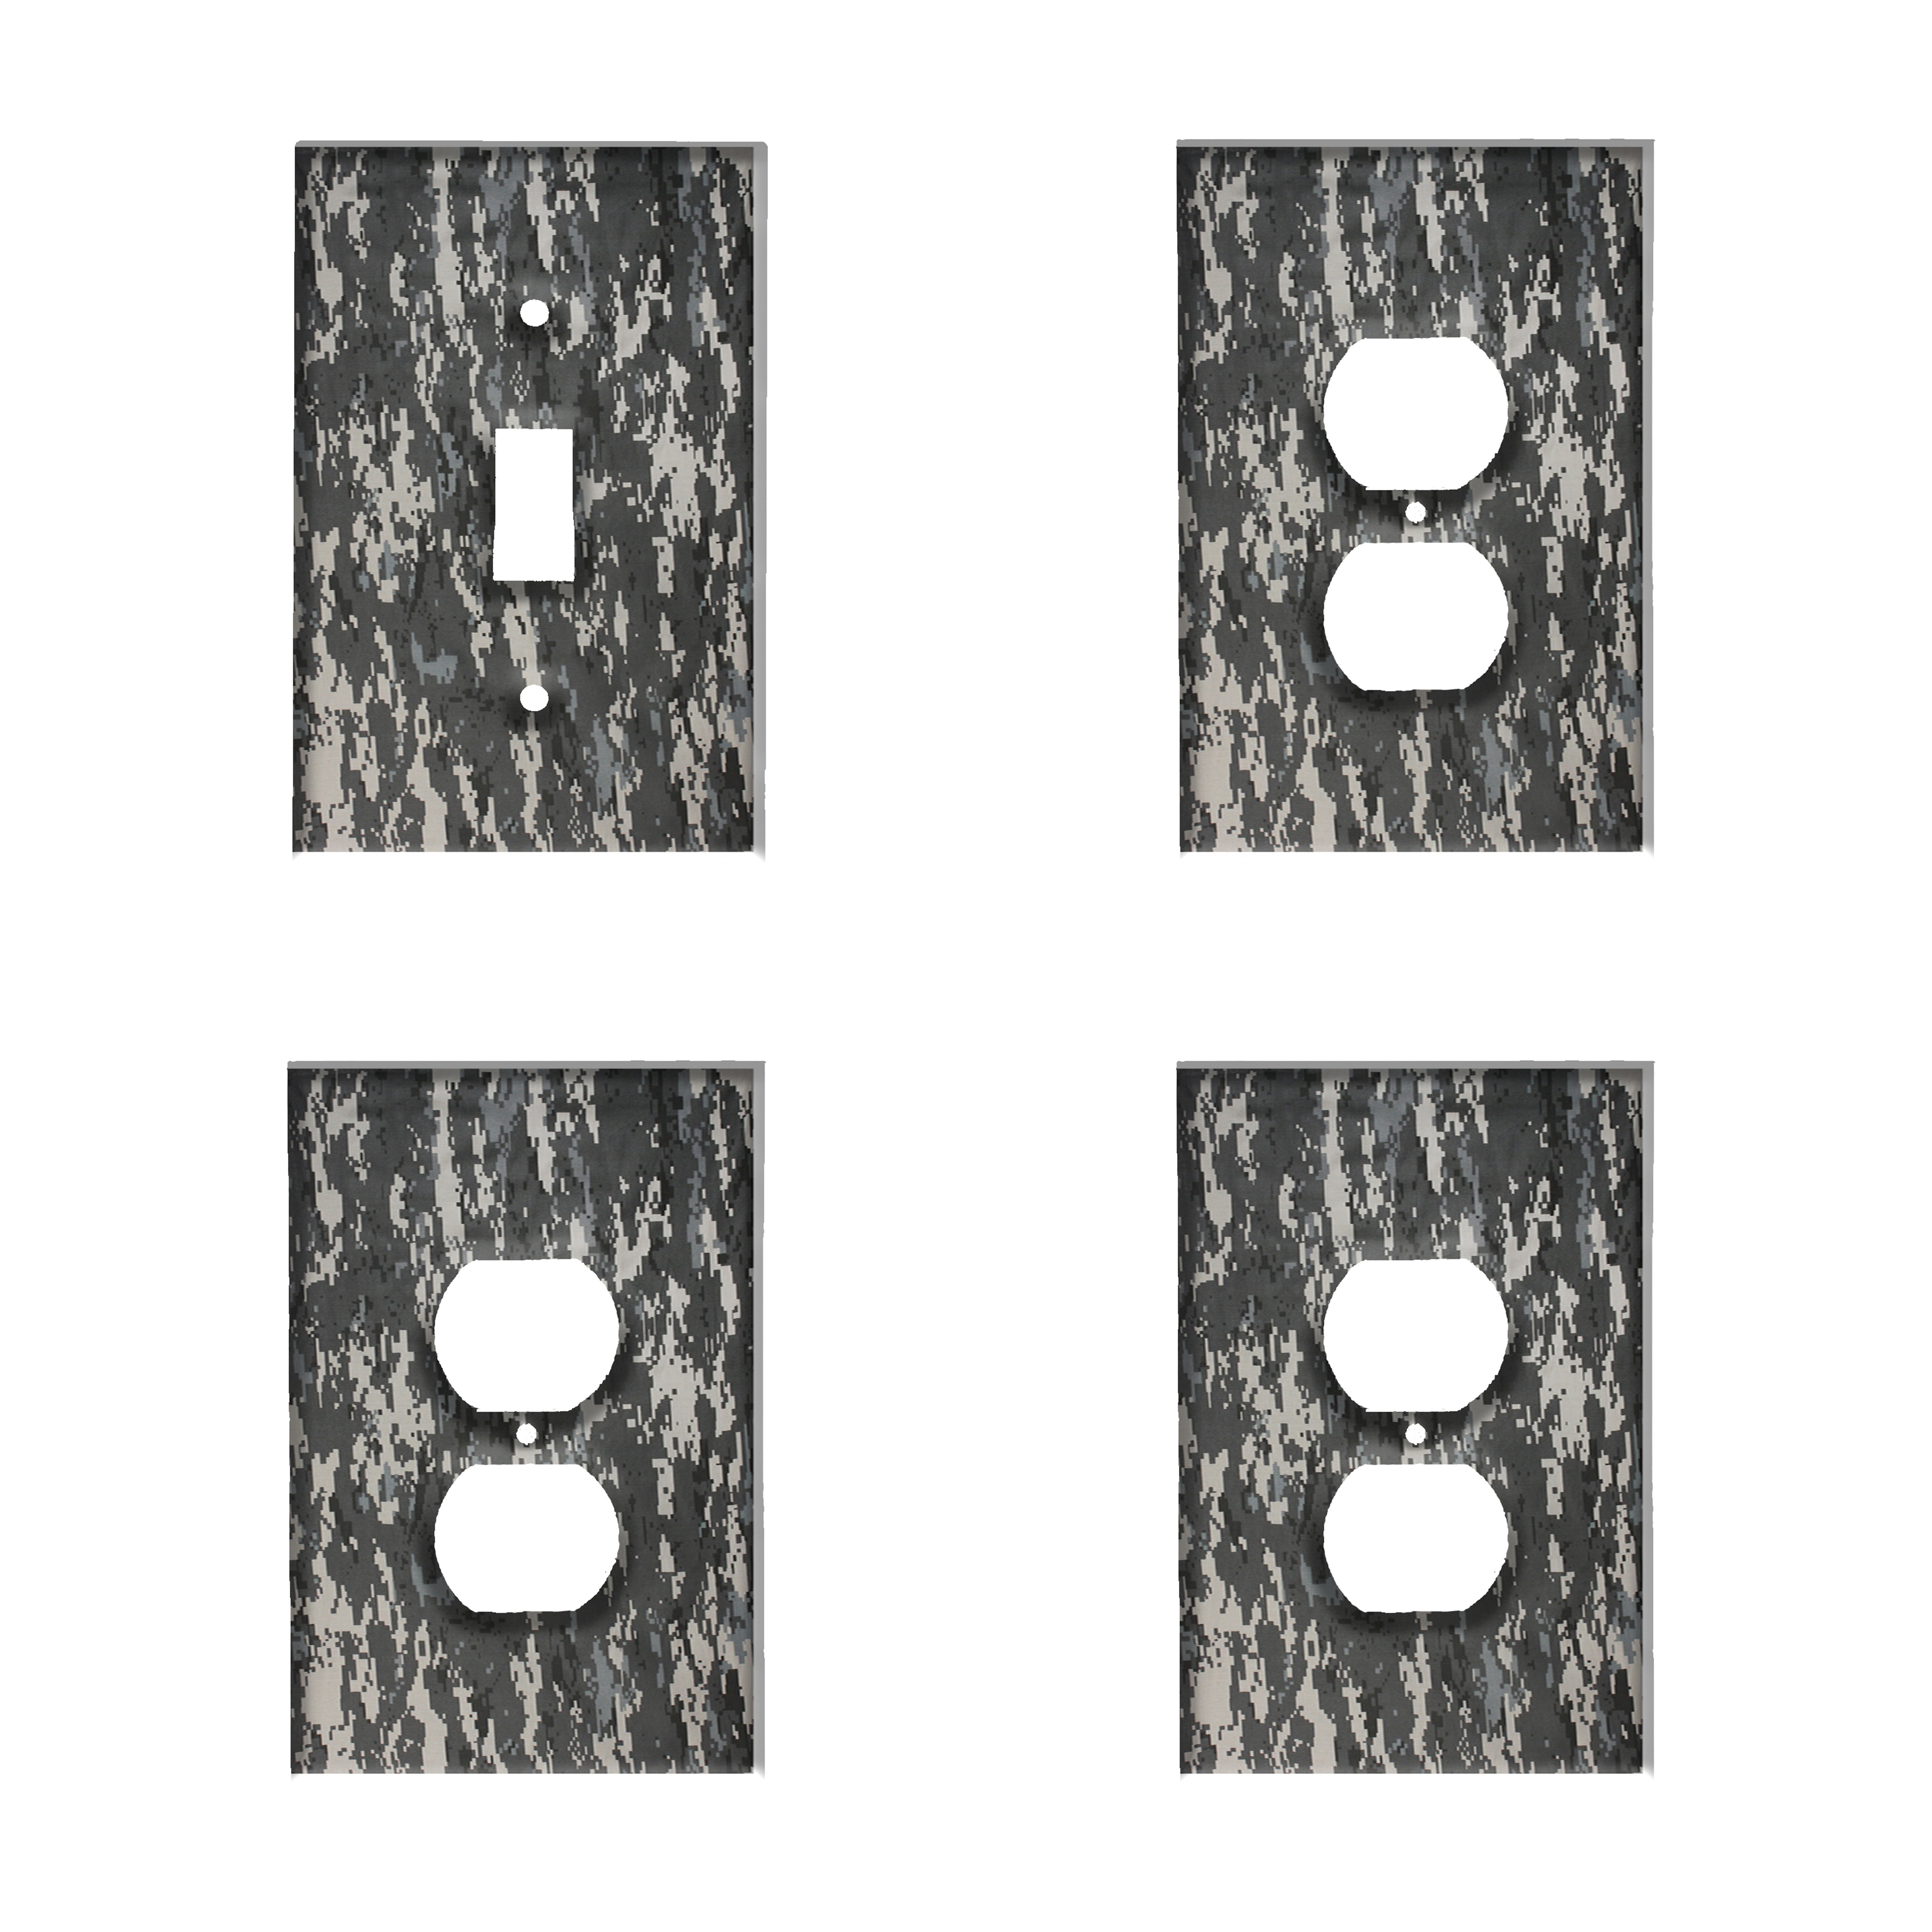 Digital Camouflage Decorative Outlet Cover Wall Plate 